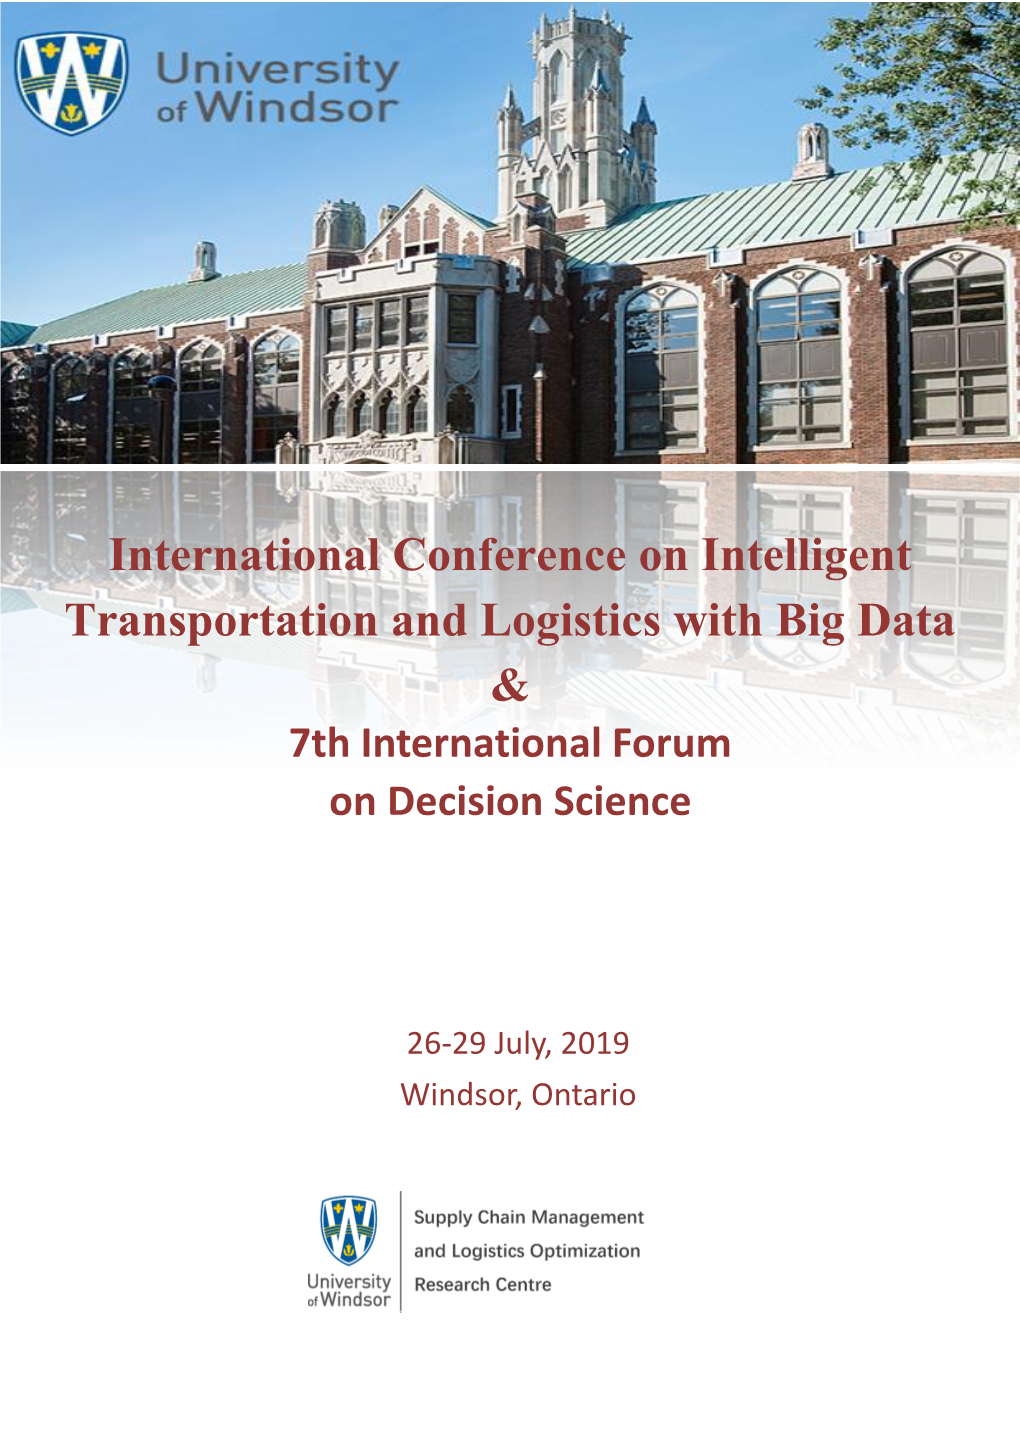 International Conference on Intelligent Transportation and Logistics with Big Data & 7Th International Forum on Decision Science